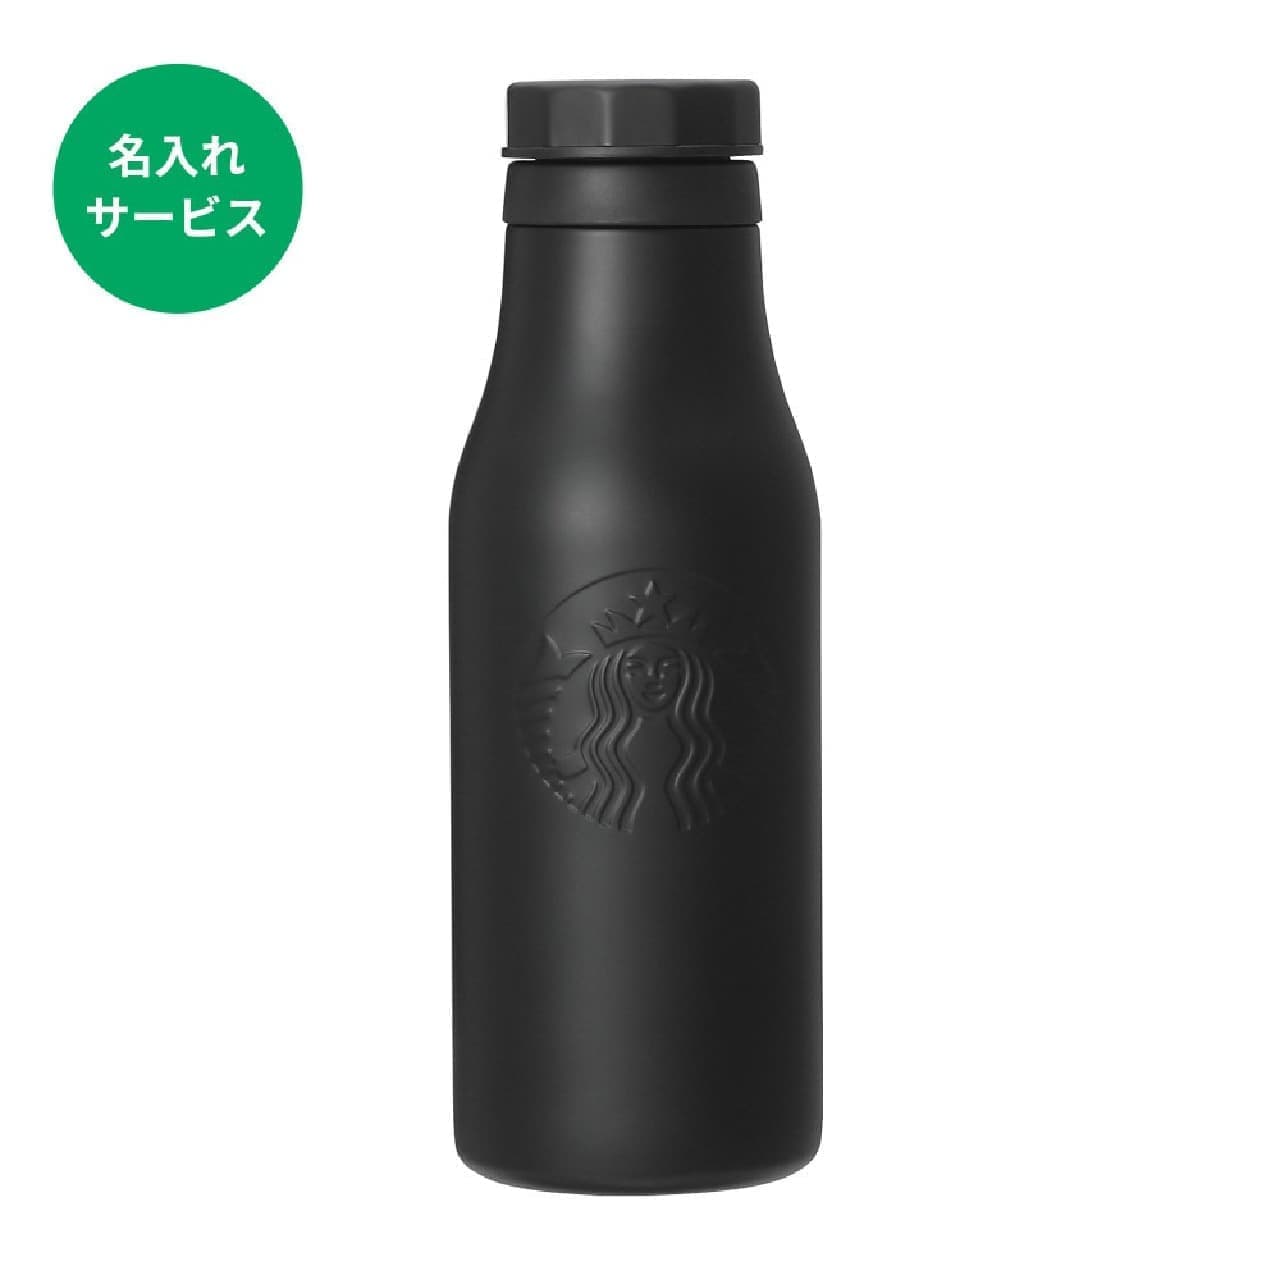 Starbucks] For Father's Day (6/16)! Stylish gift specials including coffee, tumblers, cards, etc.